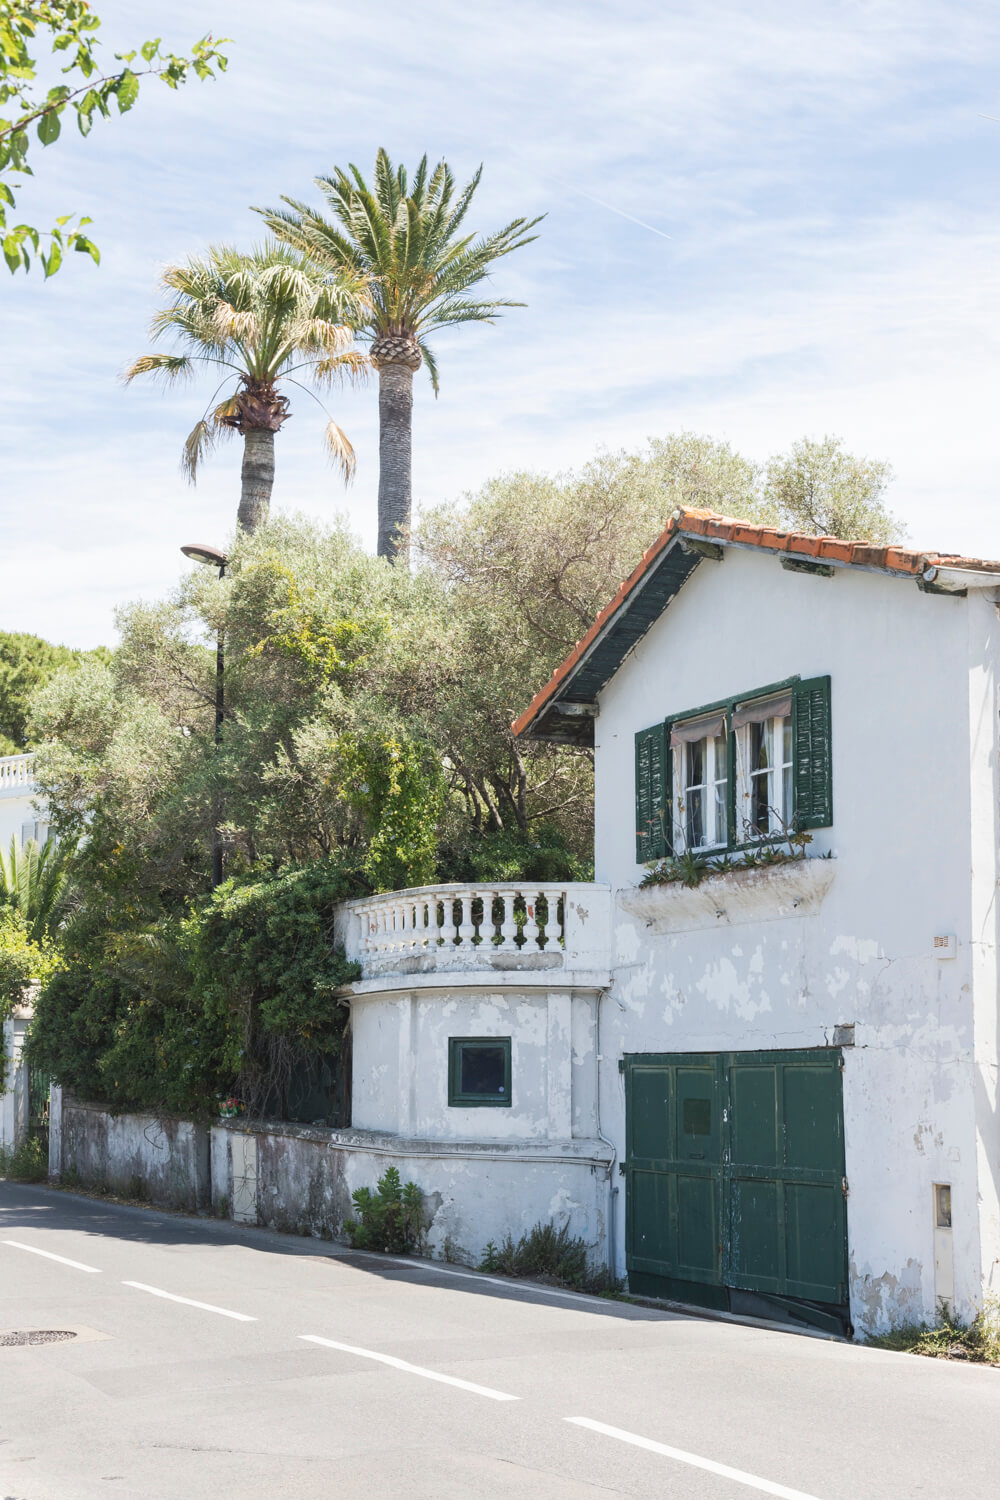 Walk from Antibes to Juan-les-Pins by Cattie Coyle Photography